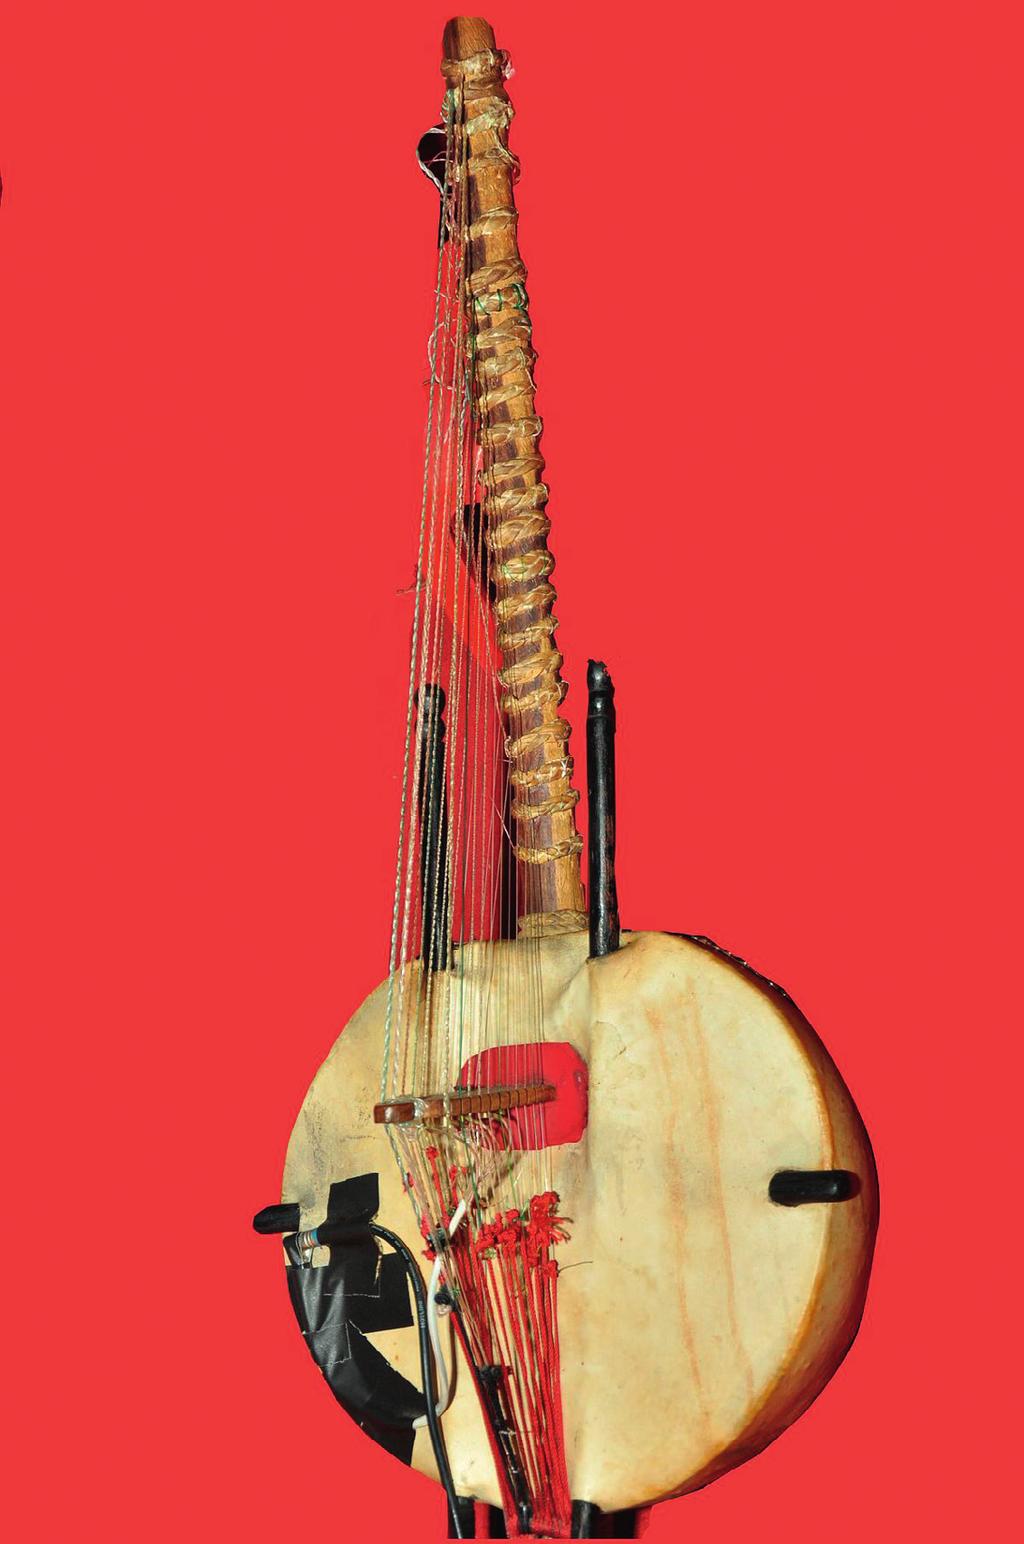 THE KORA The kora is a kind of hybrid, part harp, part lute, that is associated chiefly with the Malinke (or Maninka) people of west Africa, a people with a strong musical heritage (and whom students